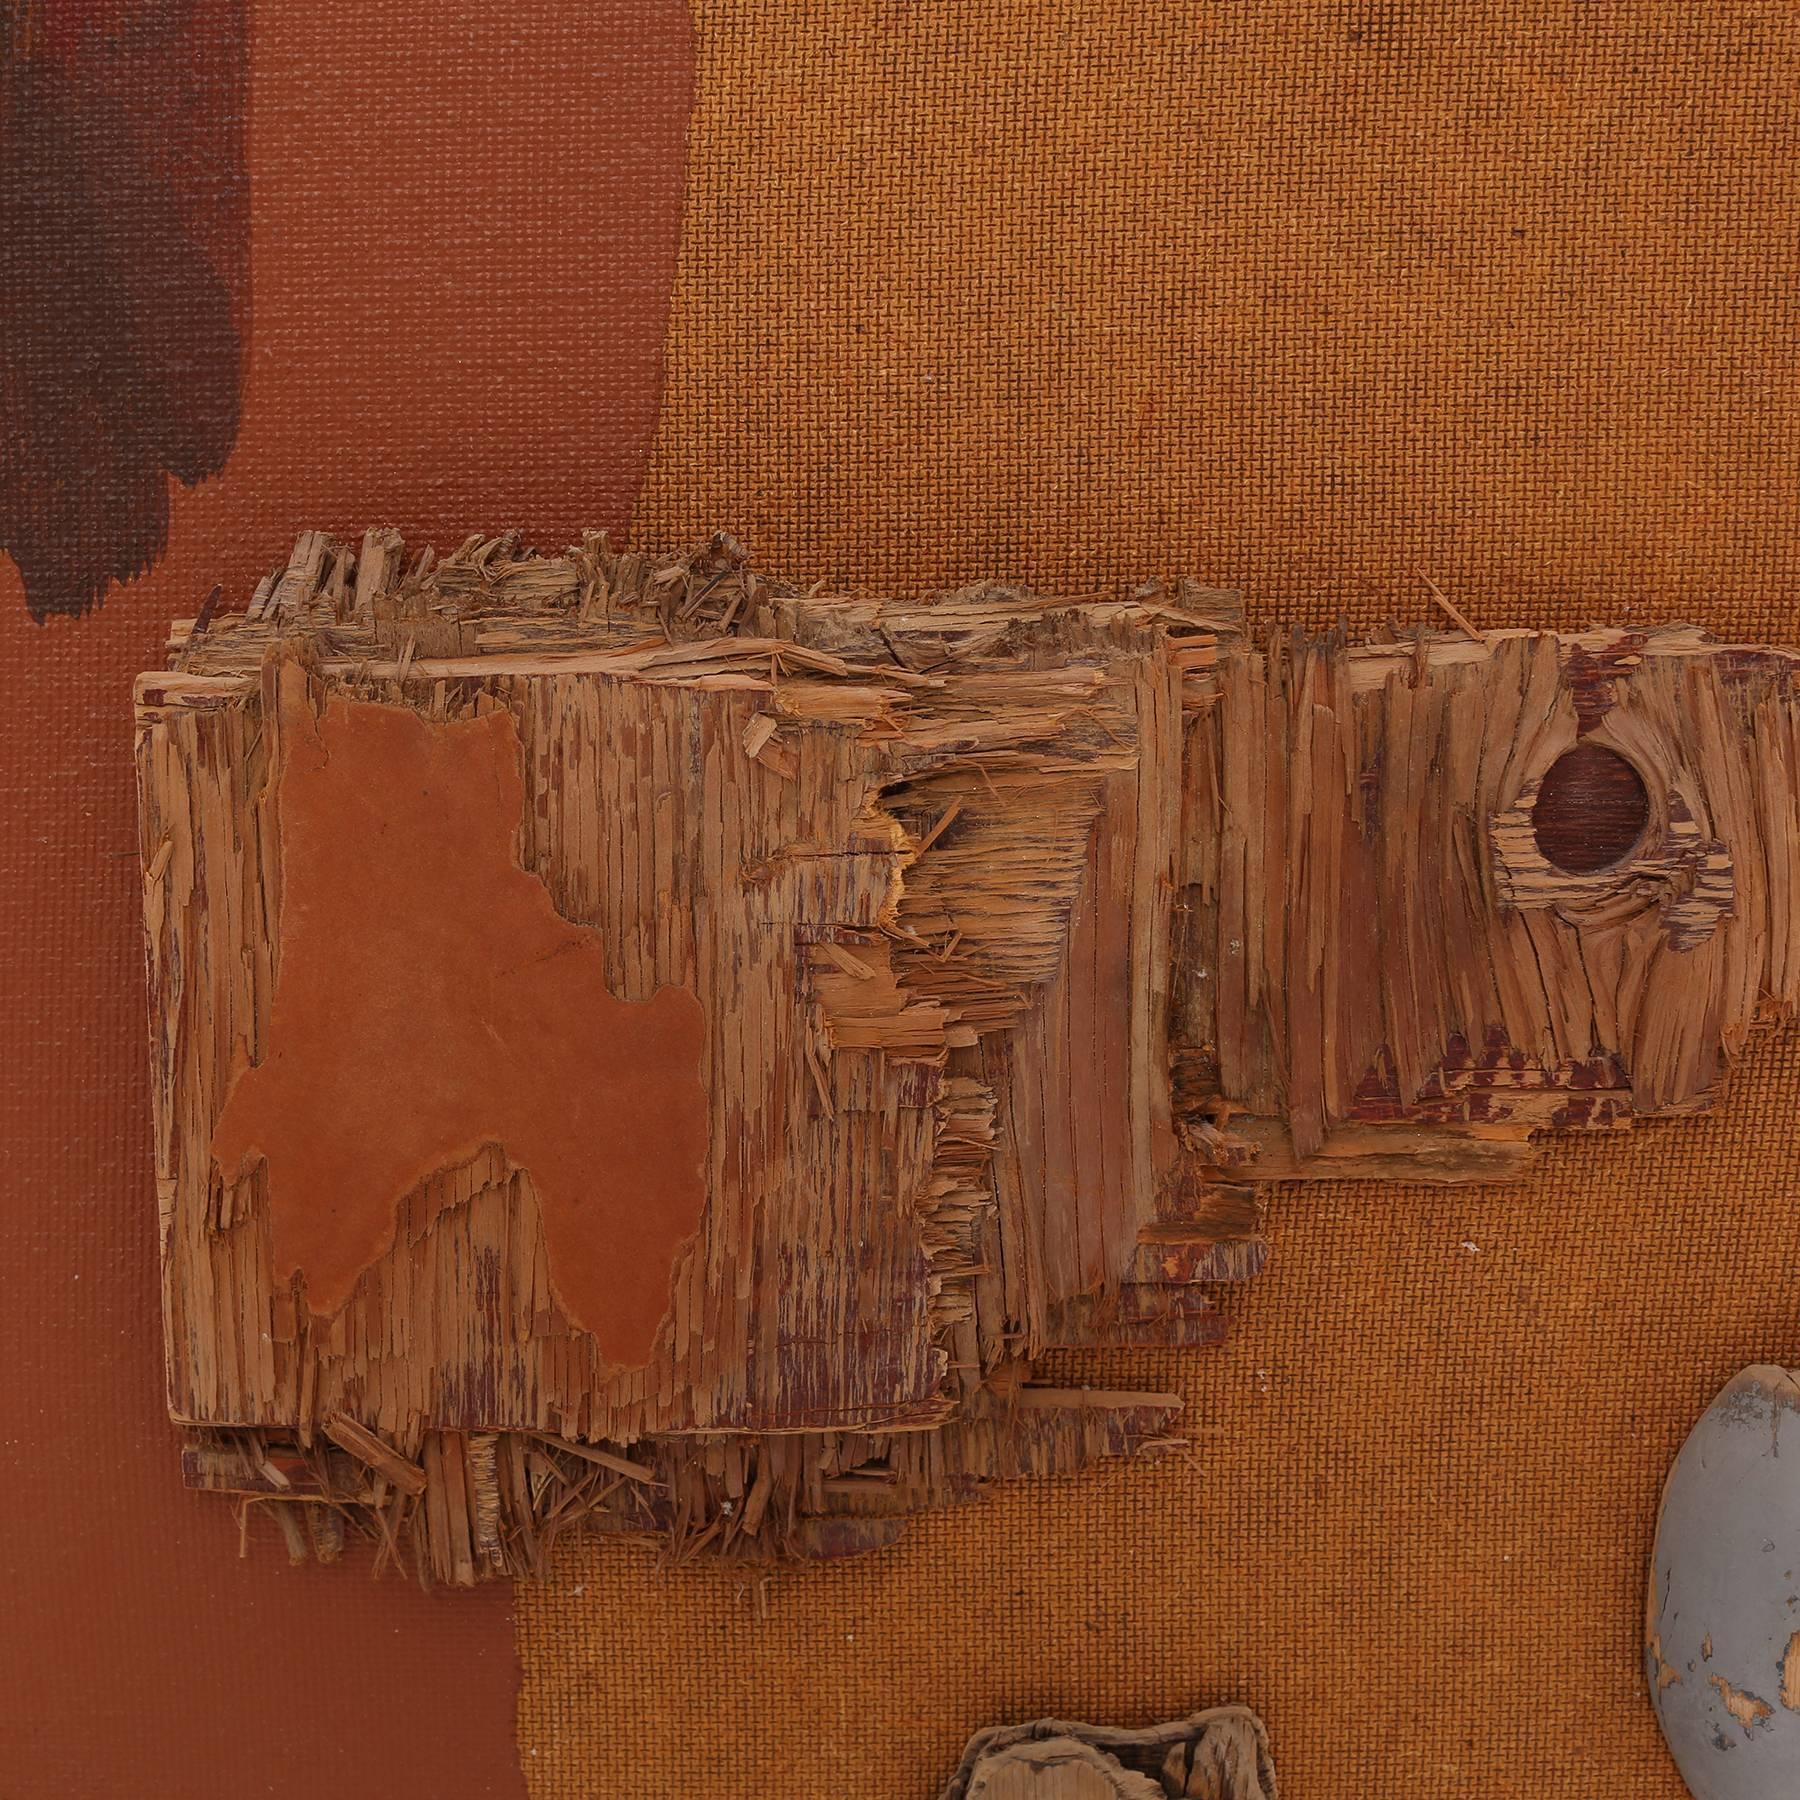 Mixed-media hard edge painting and assemblage by Jackie Carson, circa late 1970s. This unusual example for Carson is executed on board and mixes earth tones with fragments of wood. Please see Red's other listings for more works by Carson.